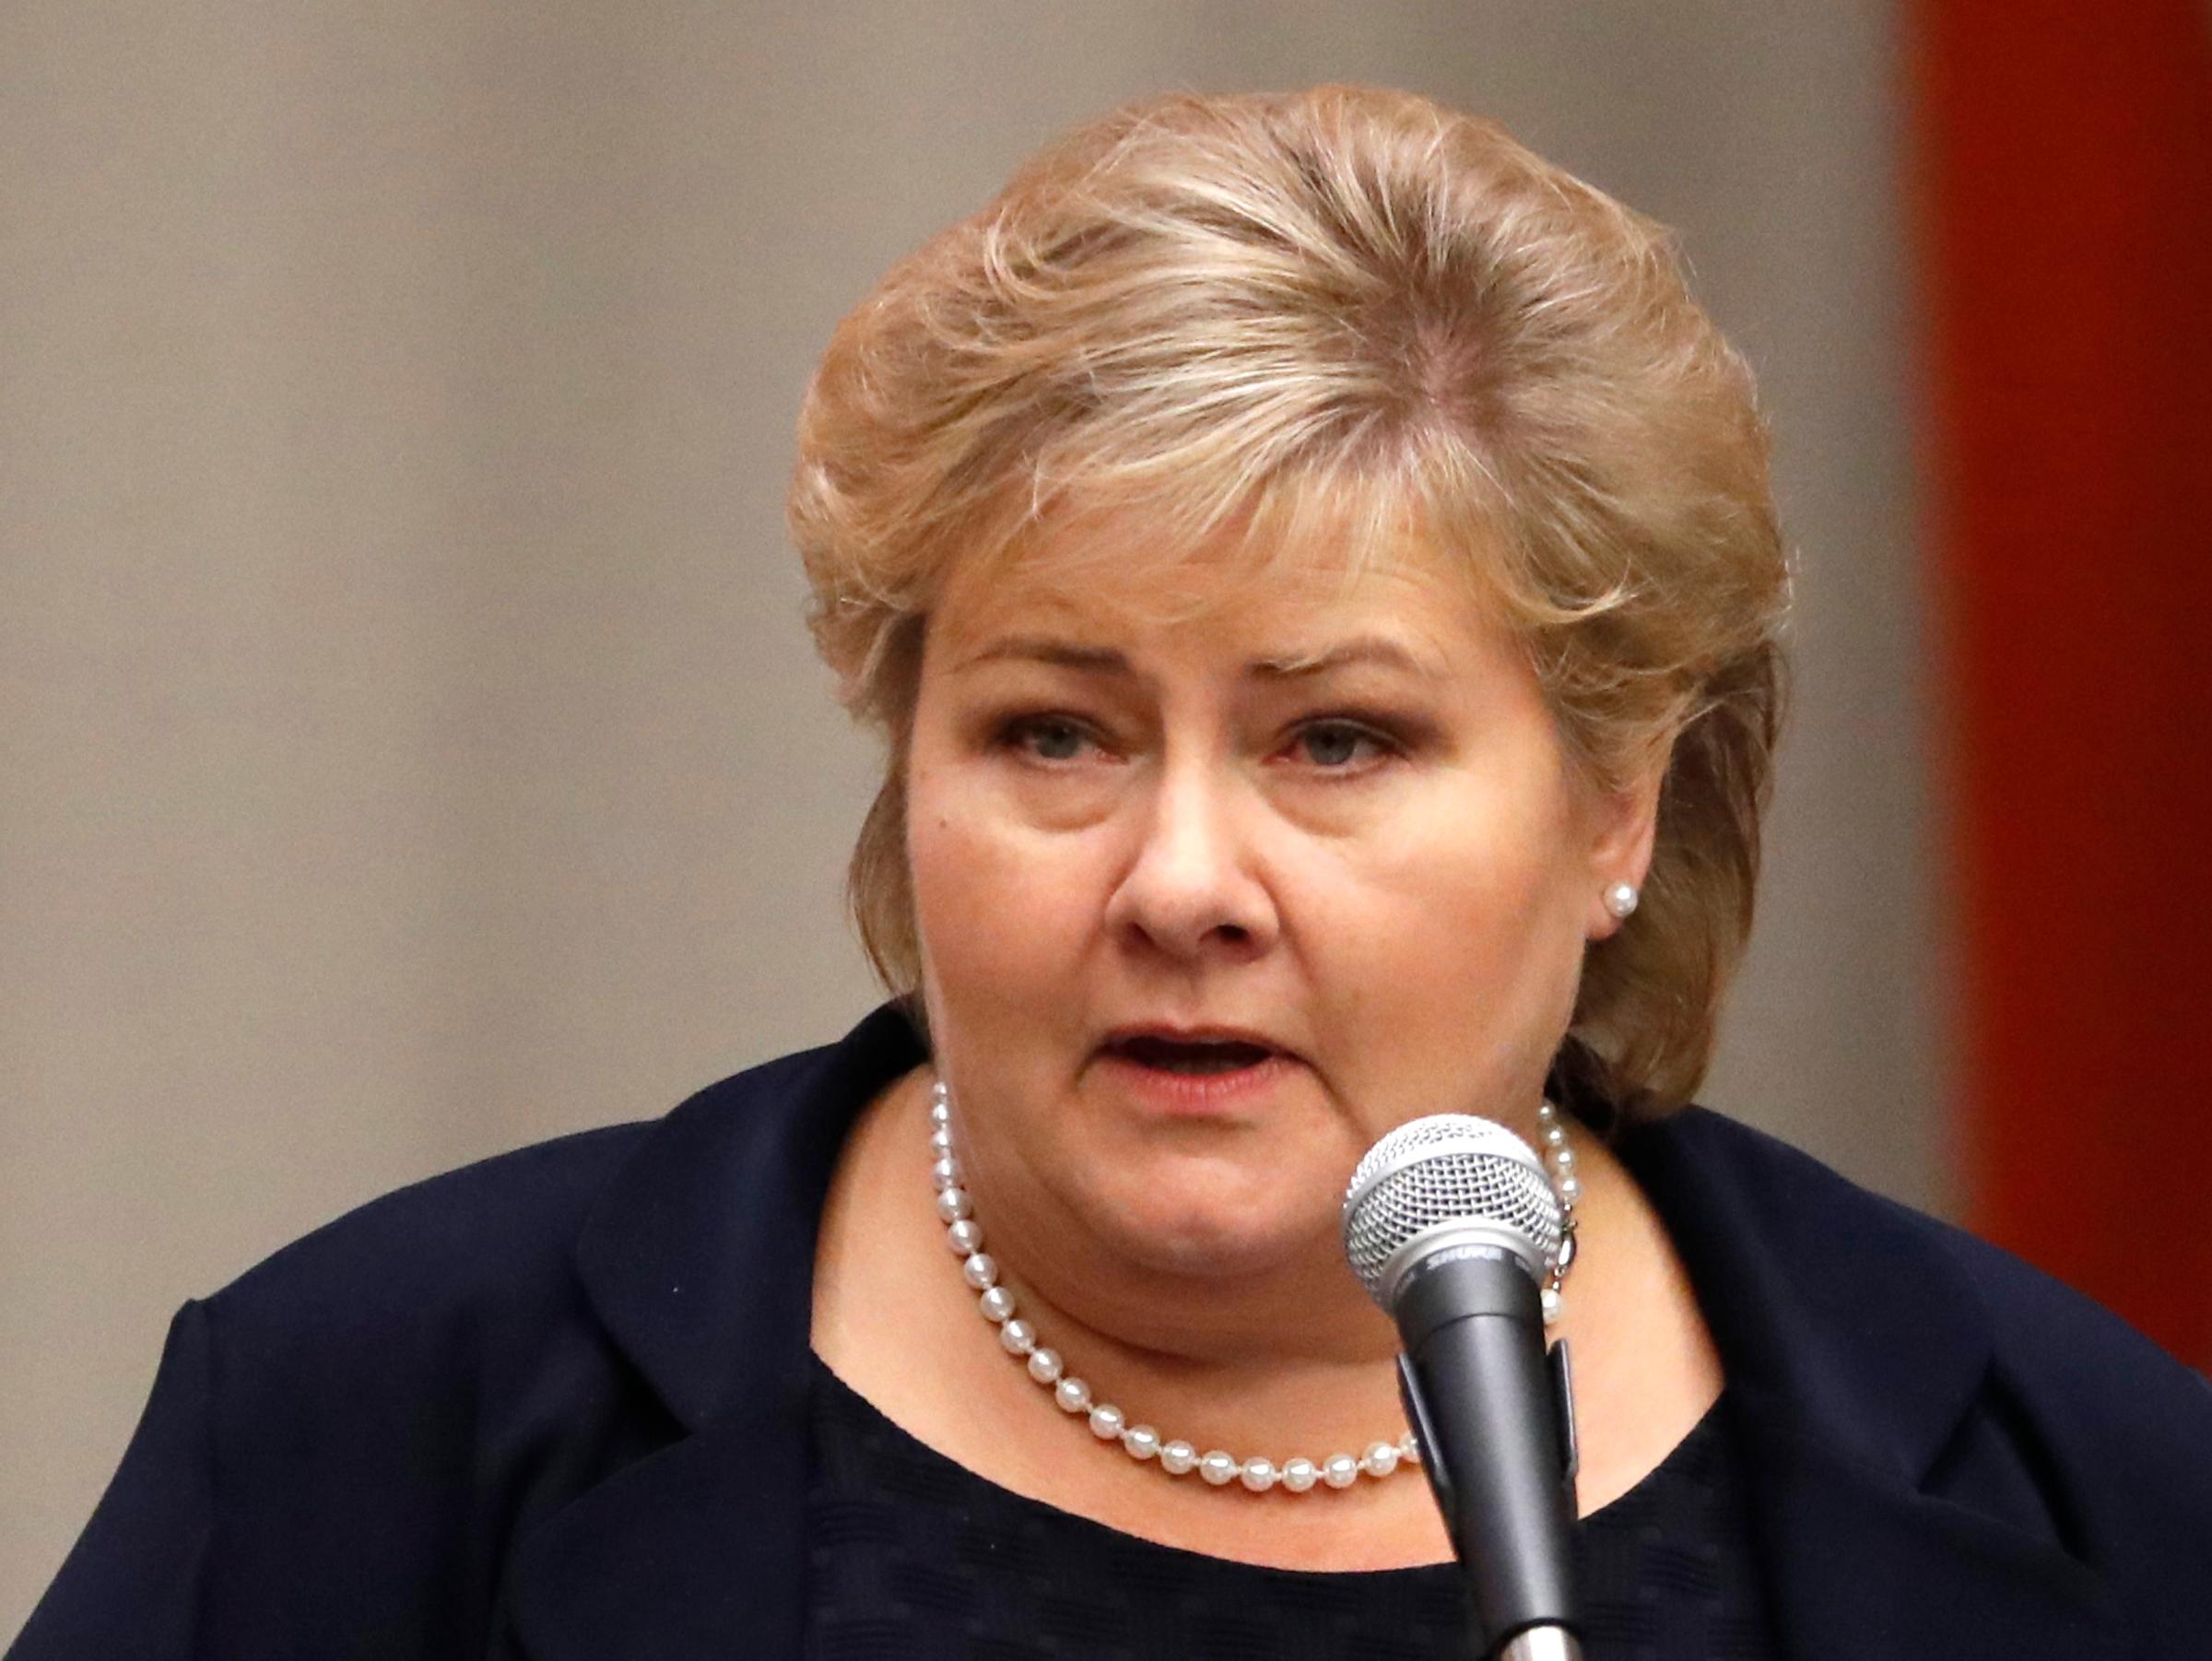 Prime Minister Erna Solberg of Norway speaks during a high-level meeting on addressing large movements of refugees and migrants at the United Nations General Assembly in Manhattan, New York